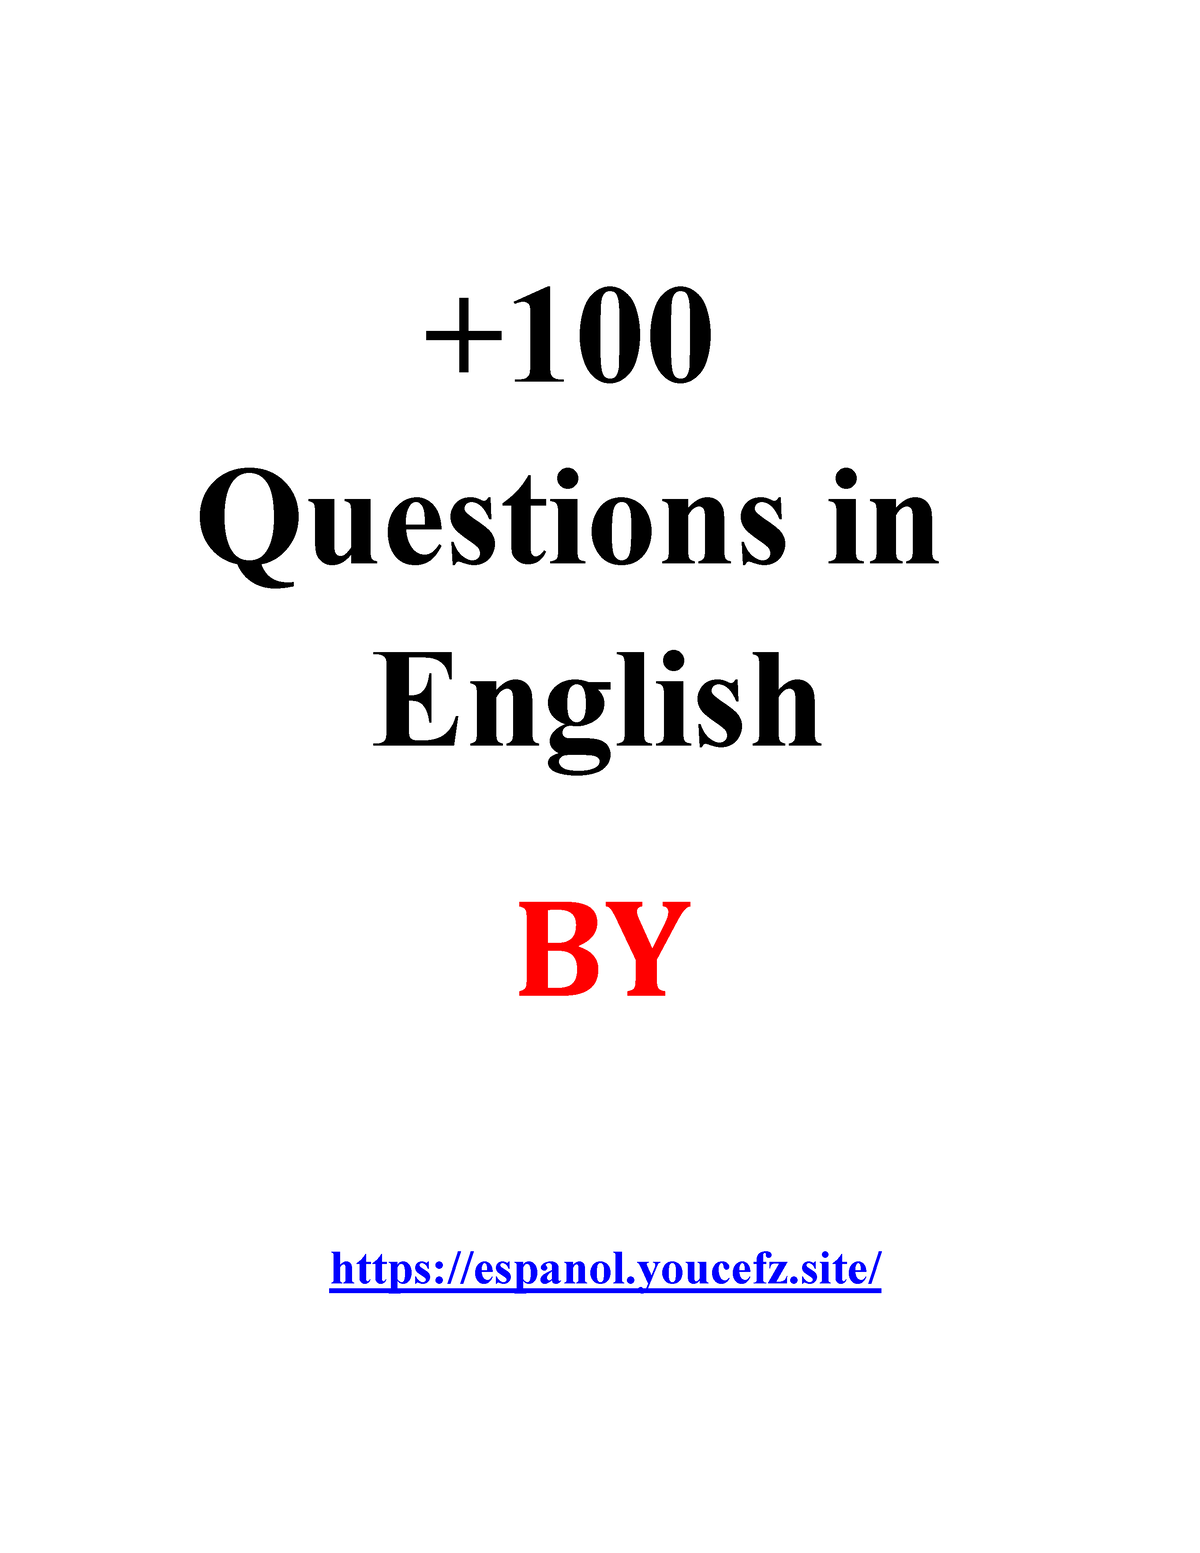 100-questions-in-english-by-espalo-questions-in-english-by-espanol